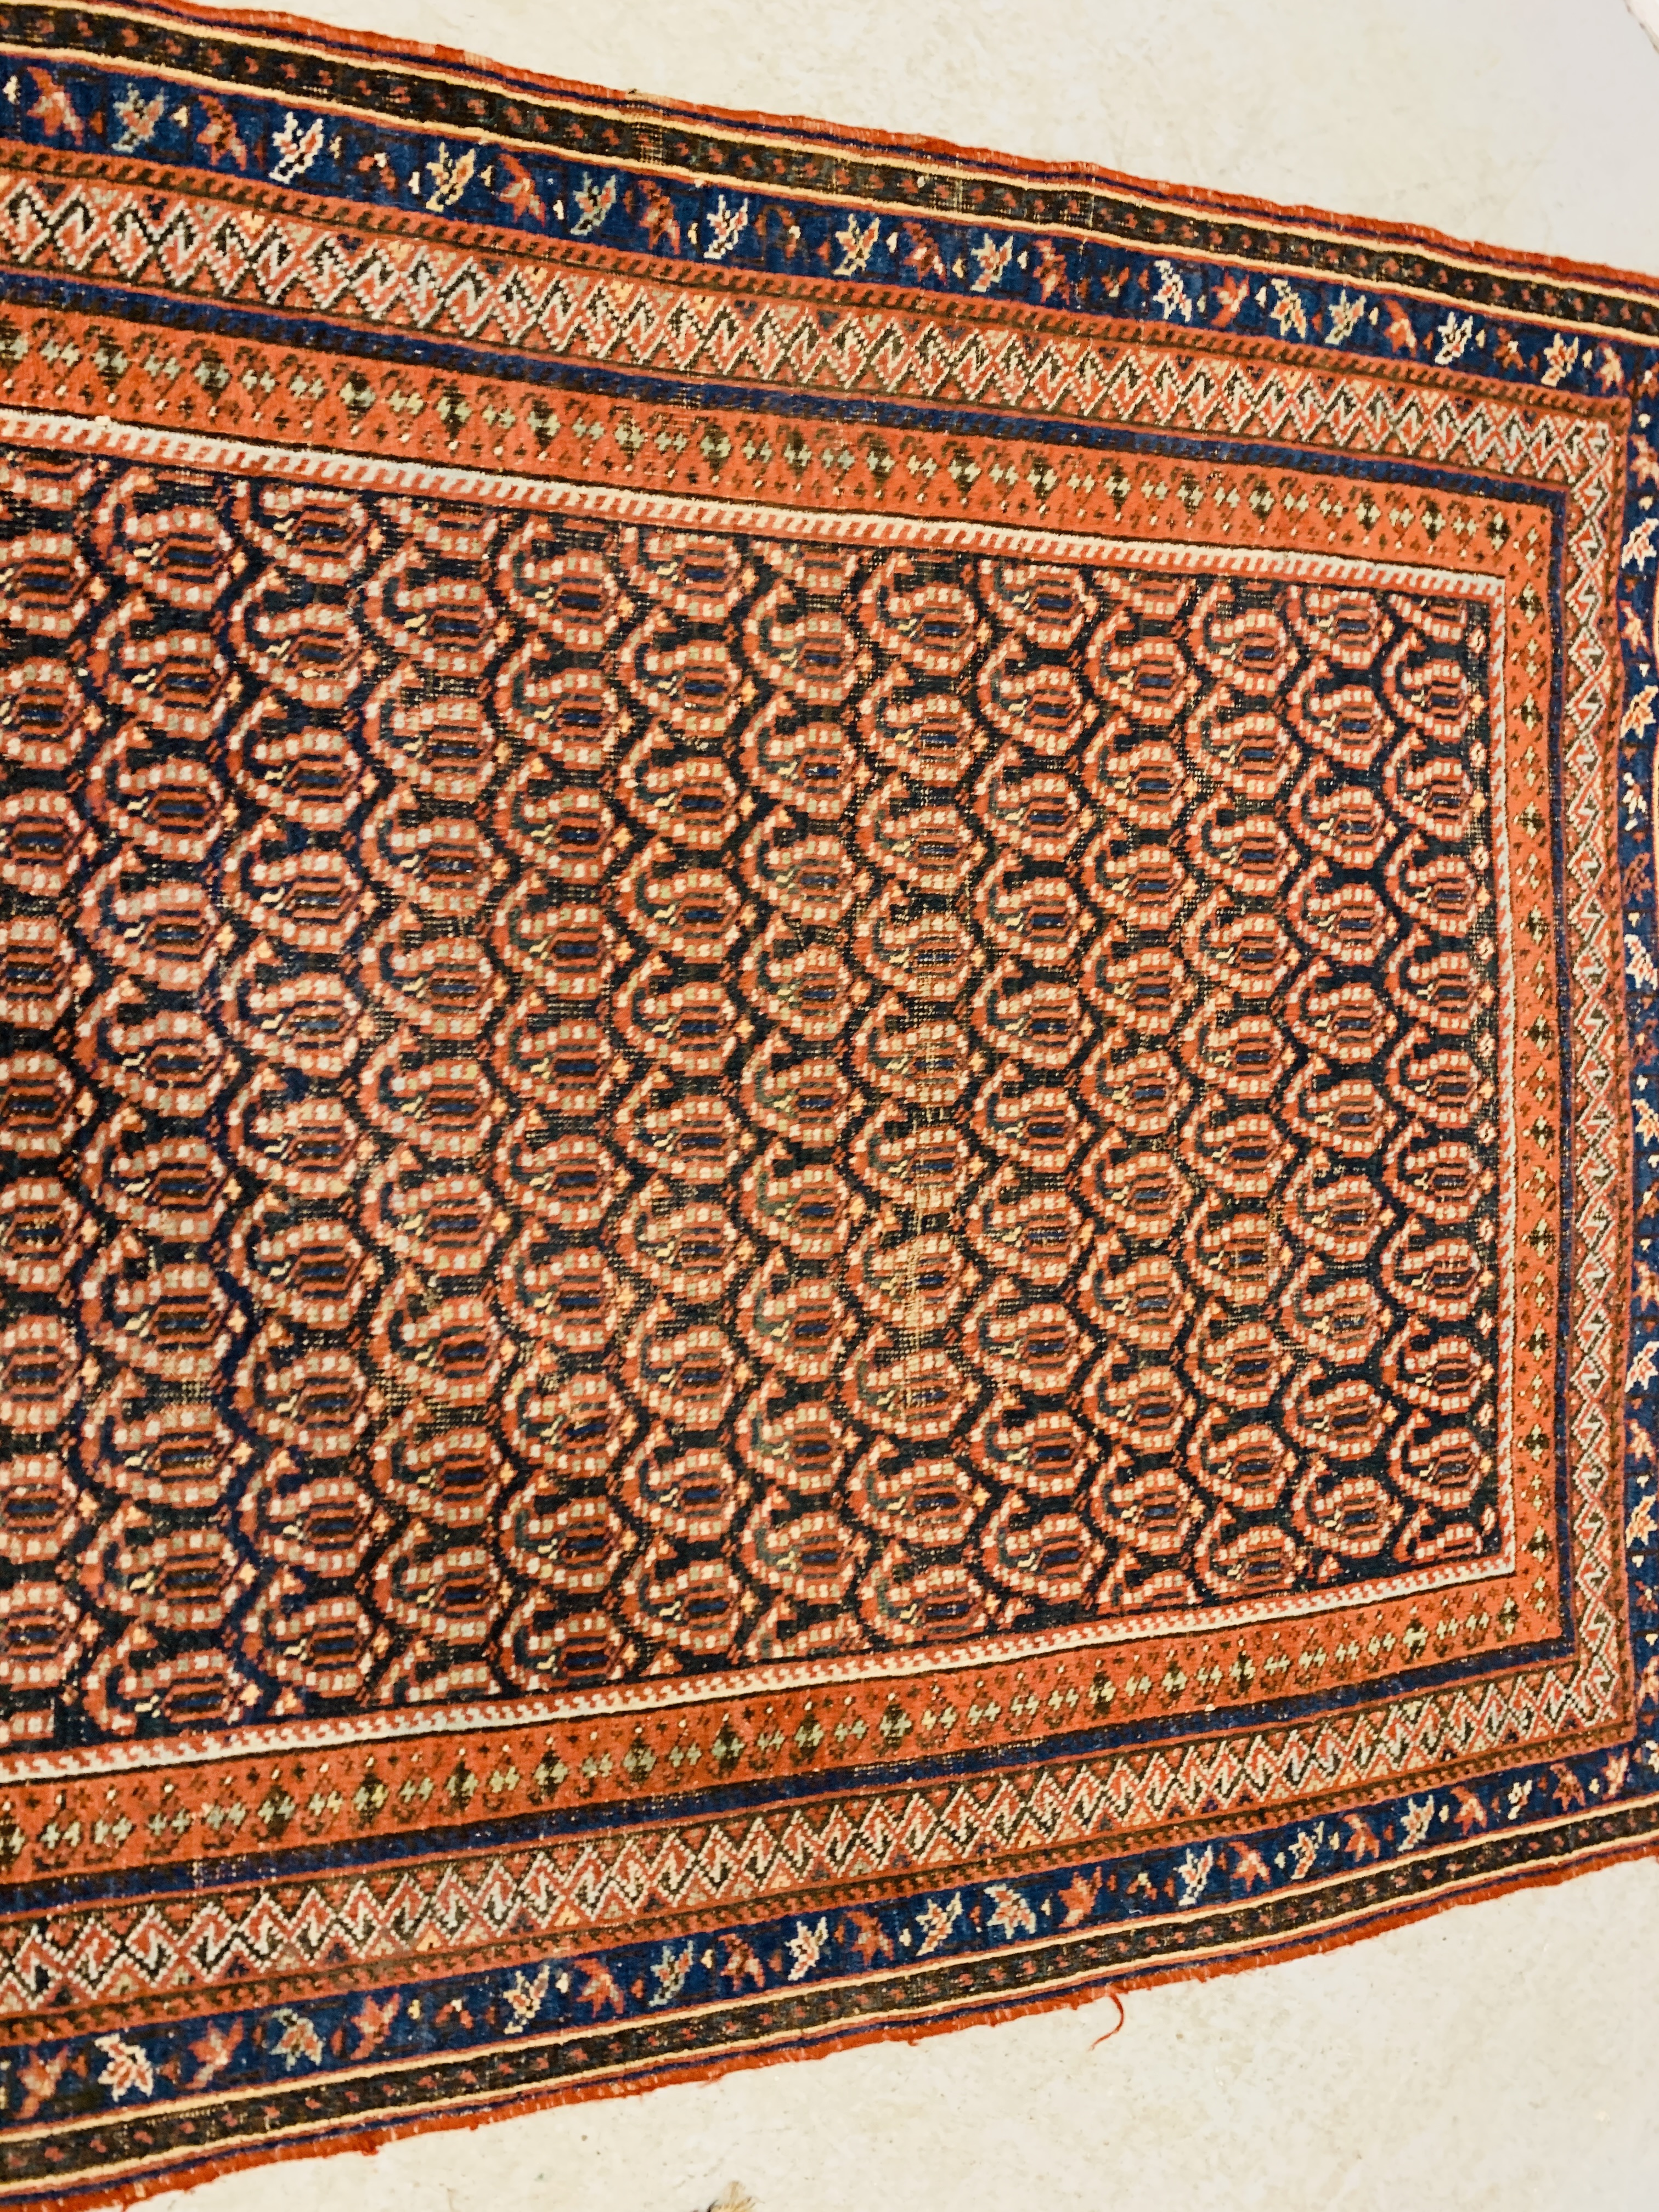 WEST PERSIAN RUG, POSSIBLY SENNEH, - Image 8 of 12